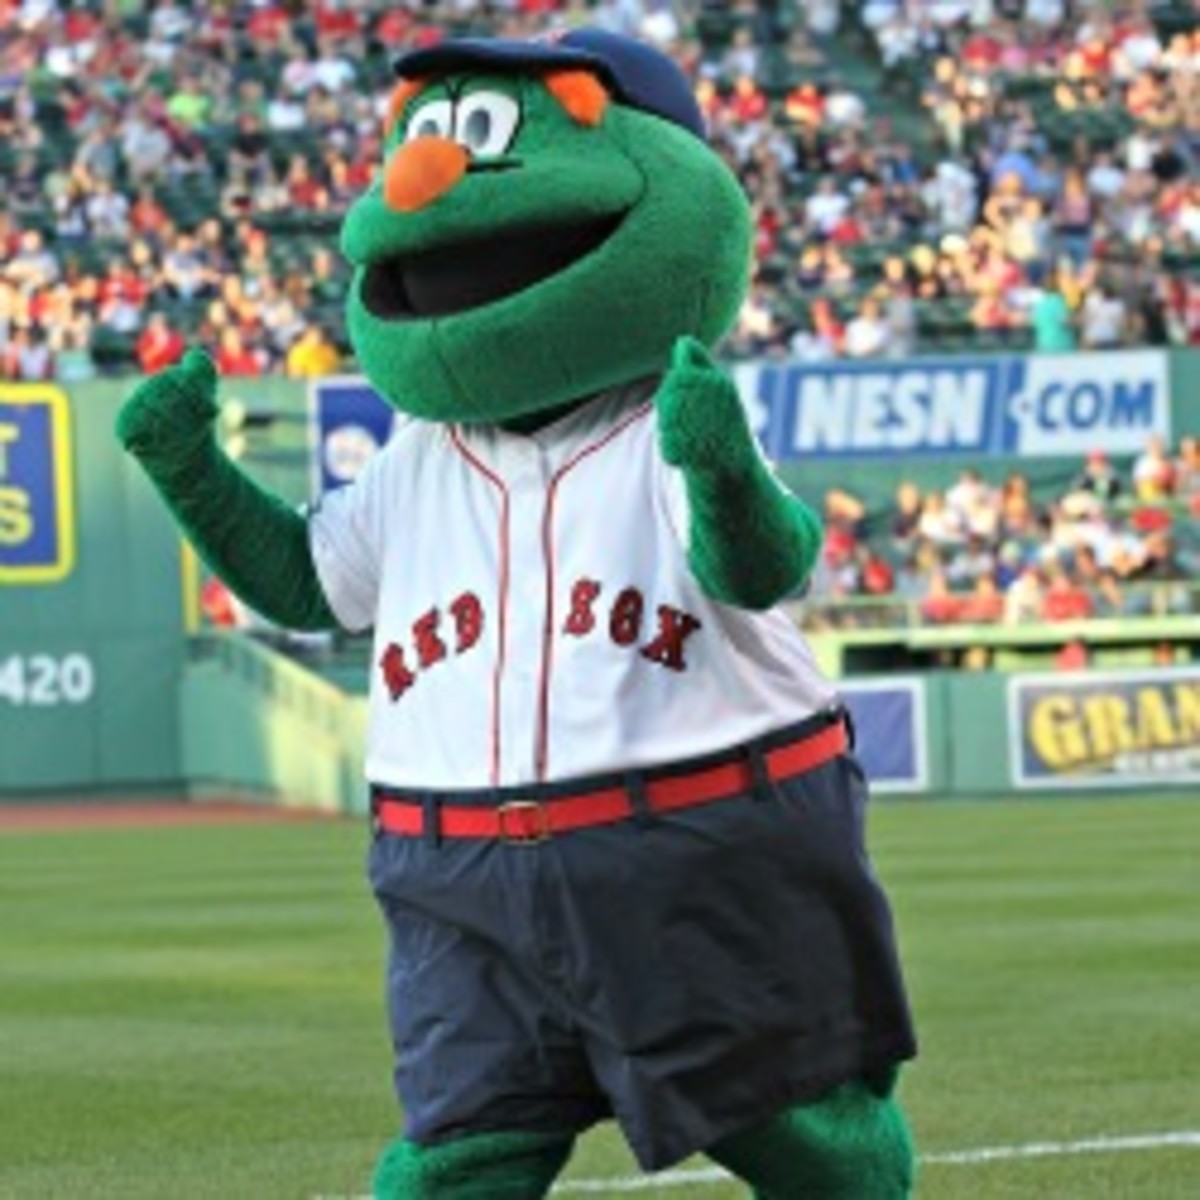 mascot wally the green monster